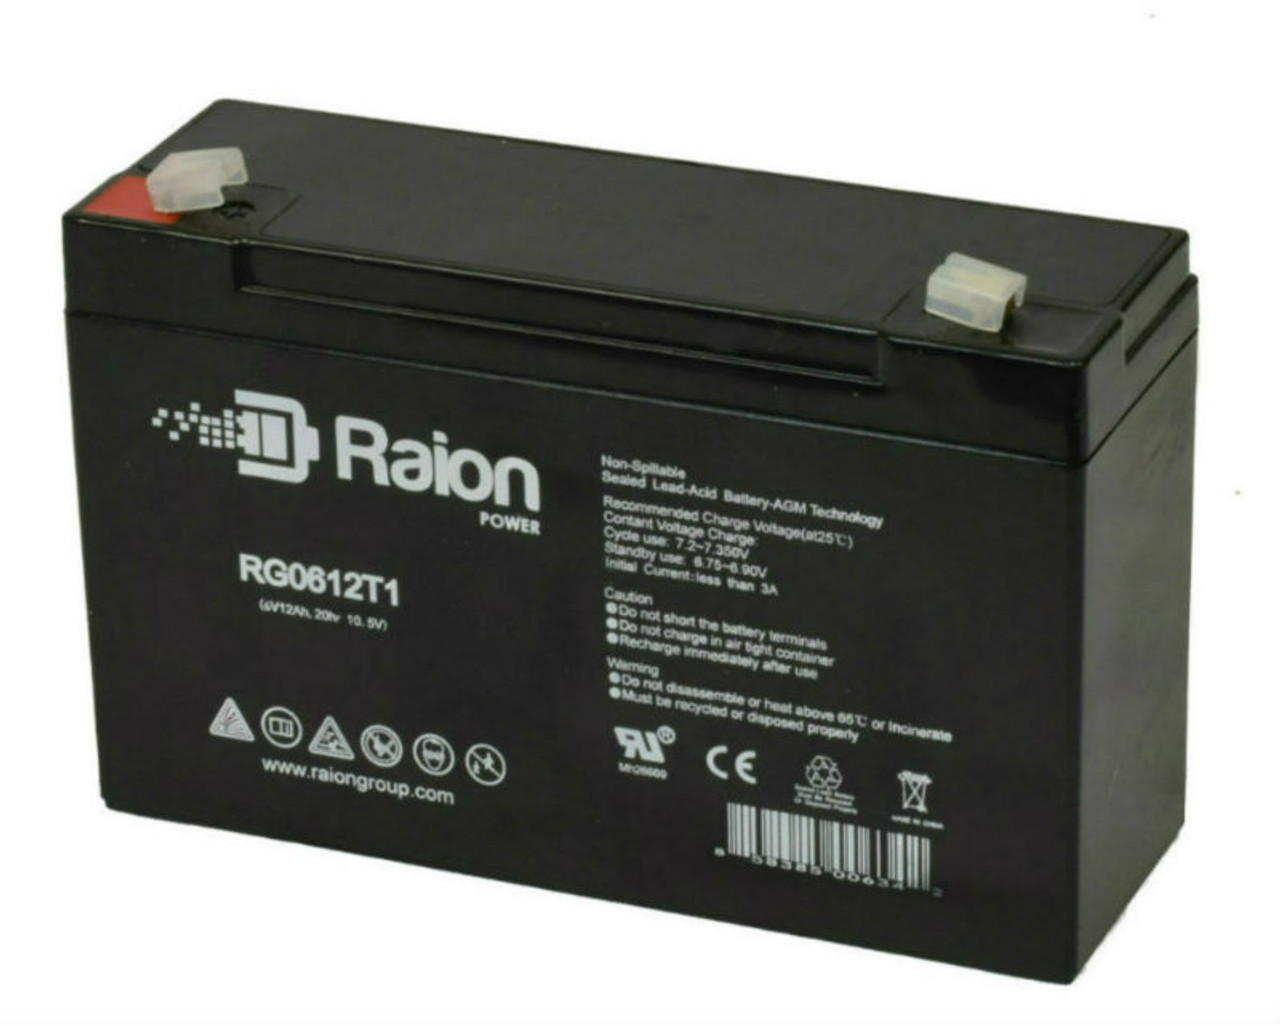 Raion Power RG06120T1 Replacement 6V 12Ah Emergency Light Battery for Sure-Lites 4CH1